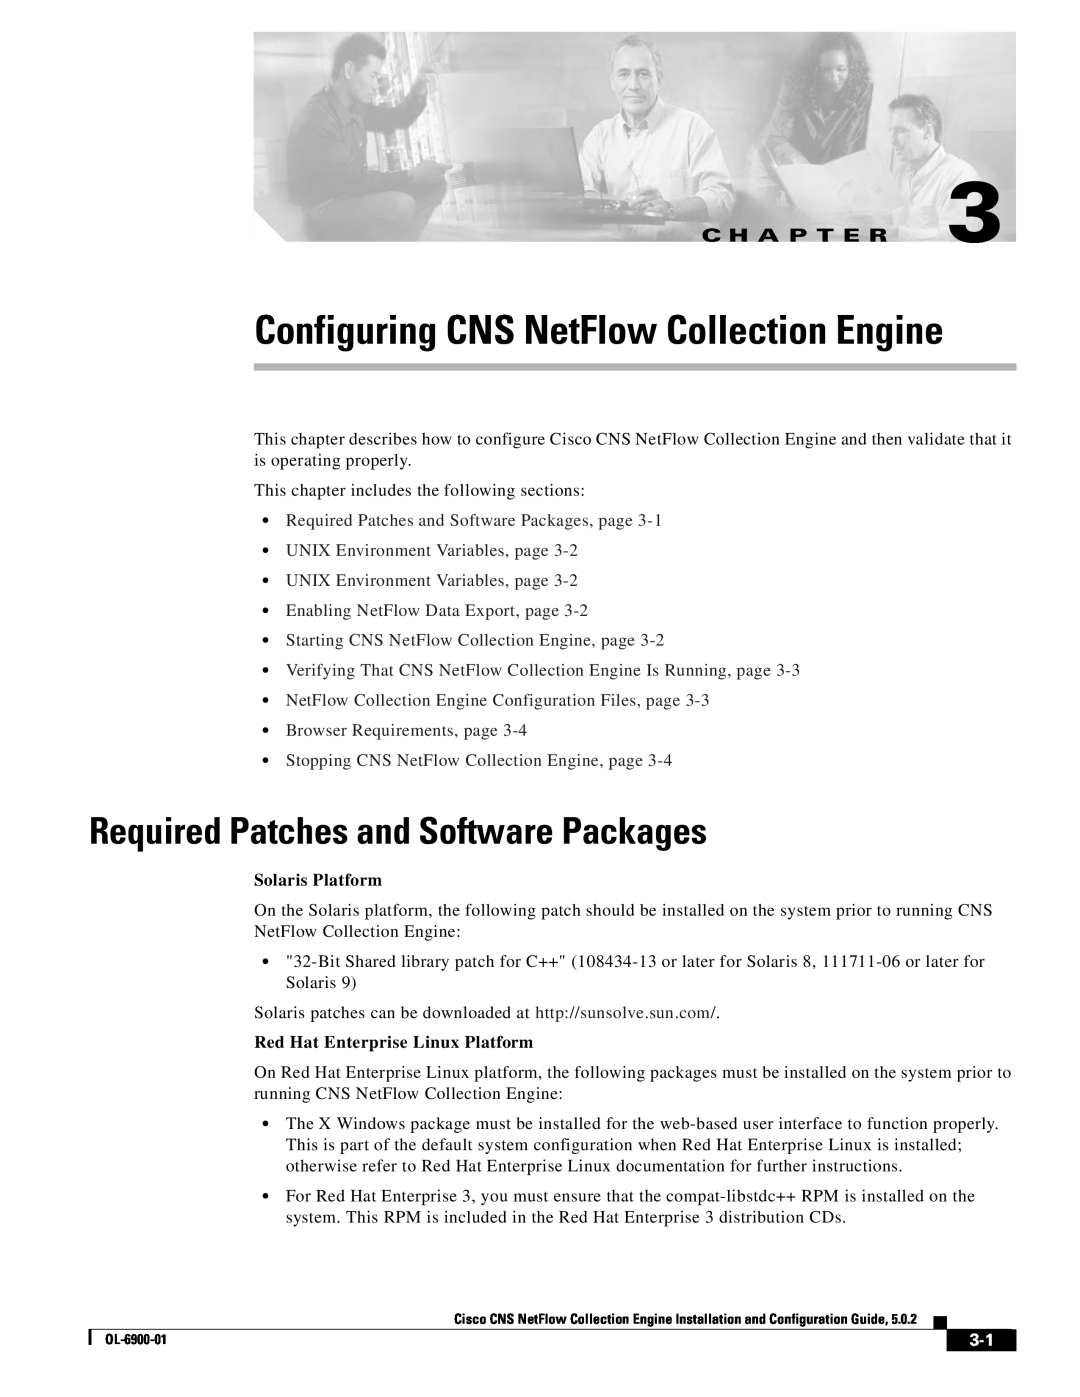 Cisco Systems OL-6900-01 Configuring CNS NetFlow Collection Engine, Required Patches and Software Packages, C H A P T E R 